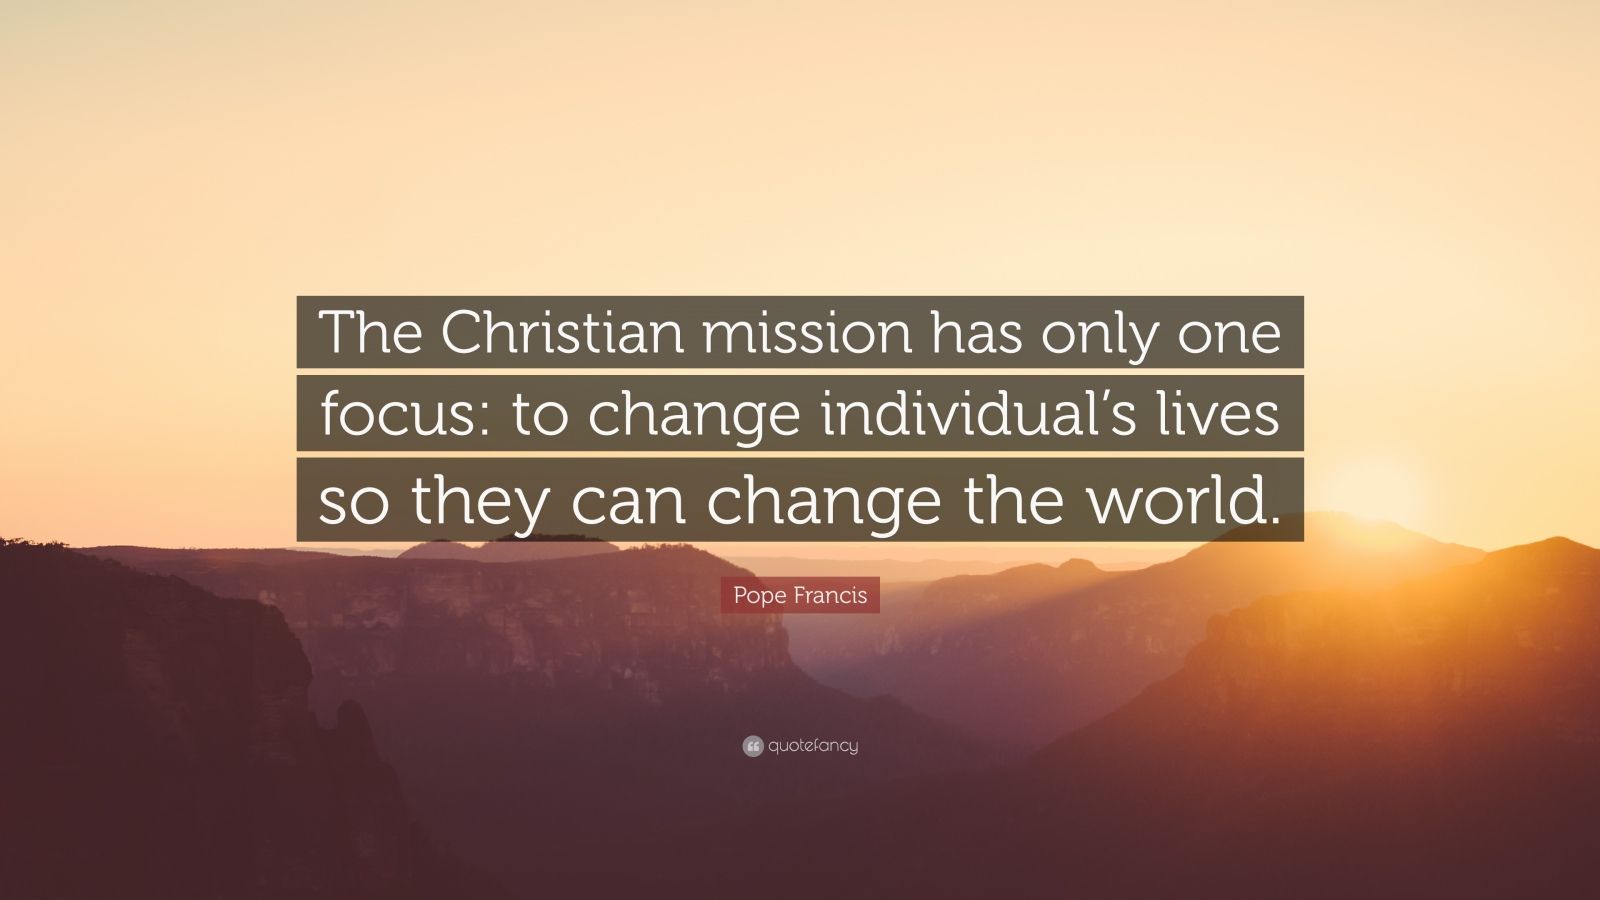 Pope Francis Quote: “The Christian mission has only one focus: to